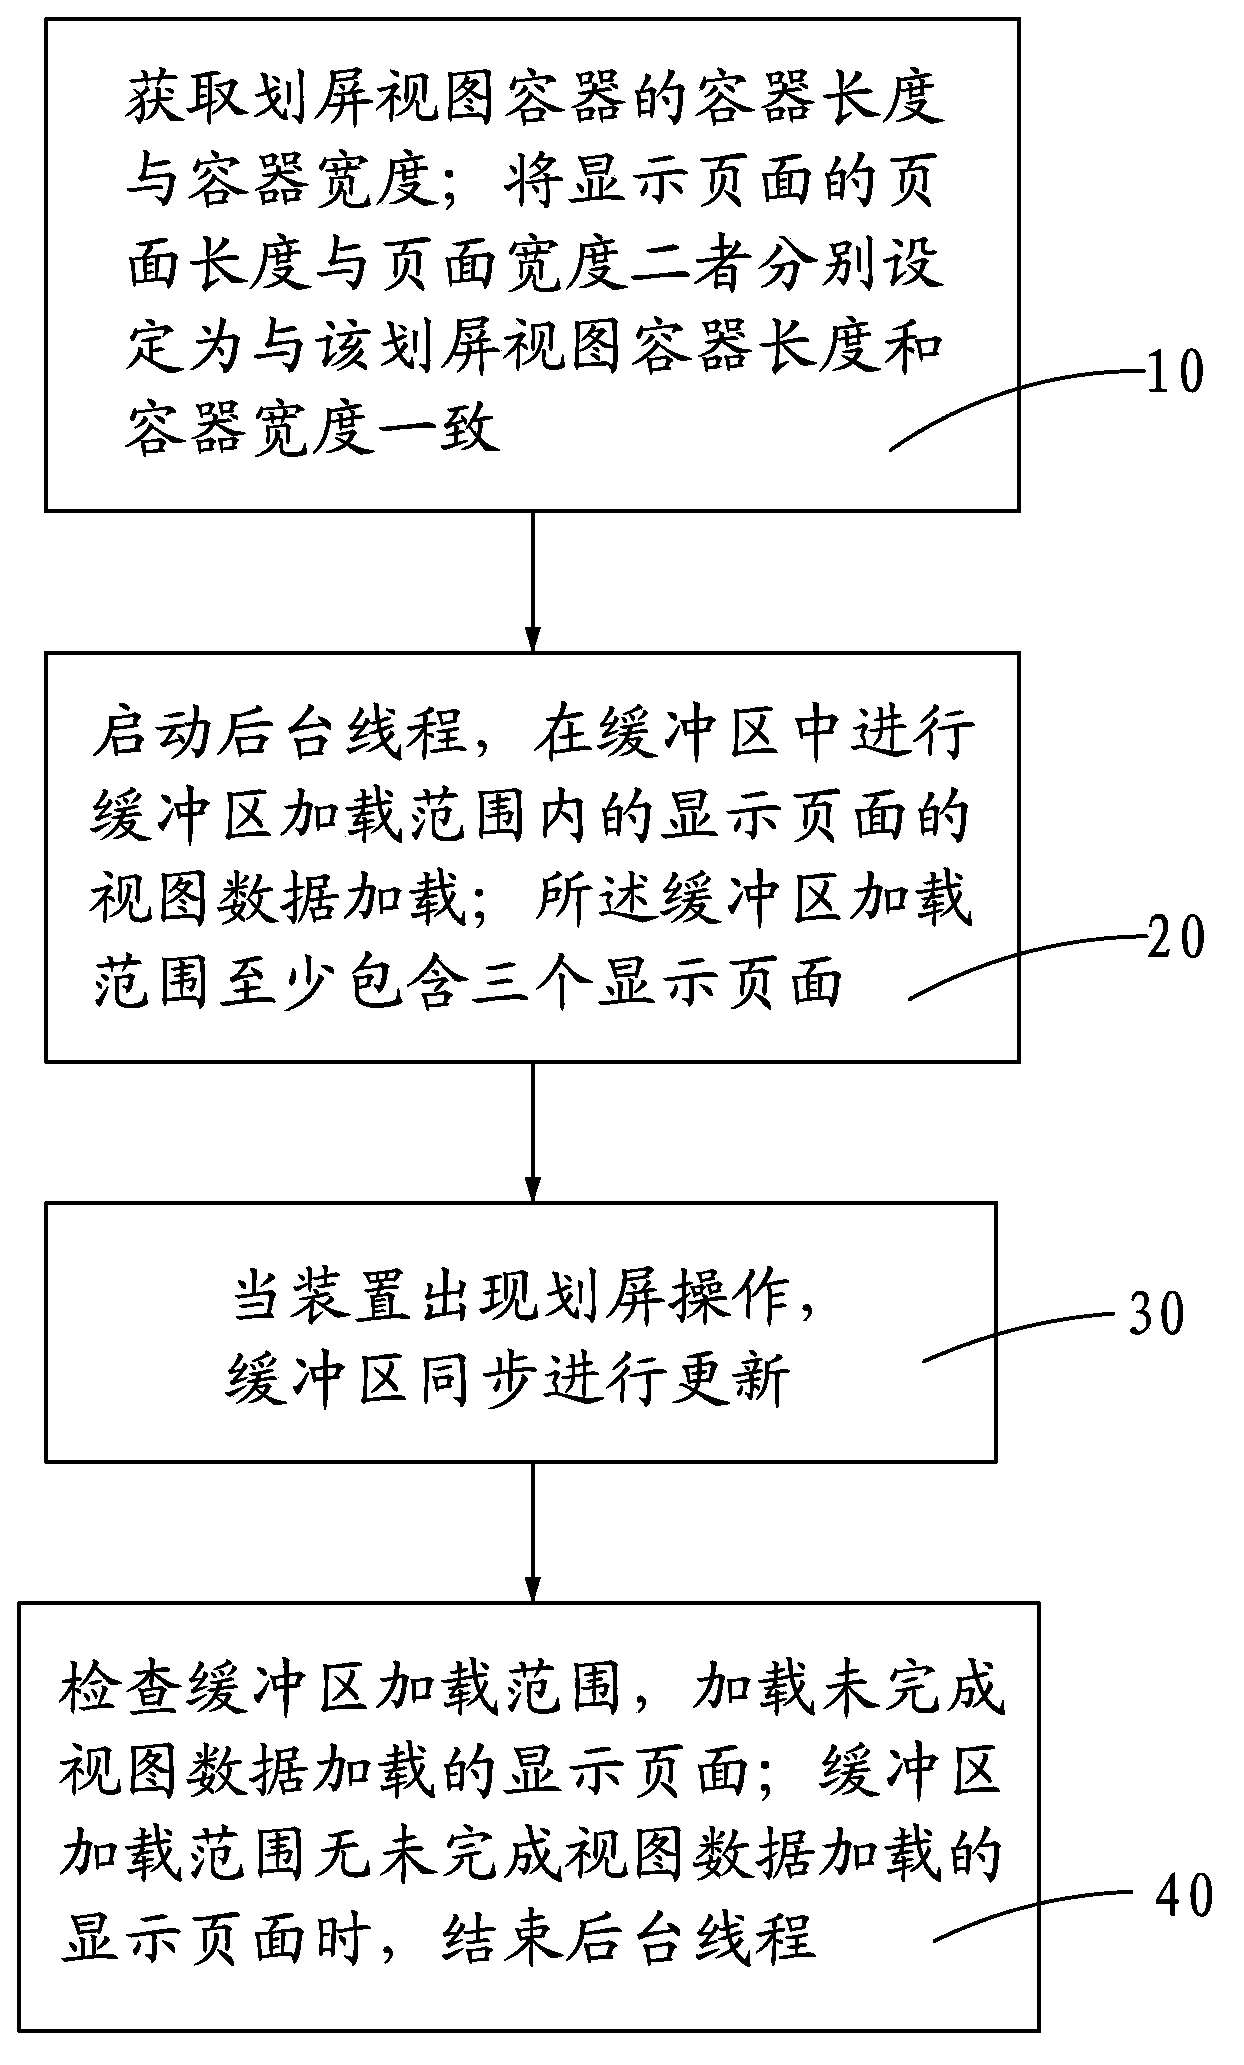 Screen sliding method using page as unit and having background loading function and cache logic function